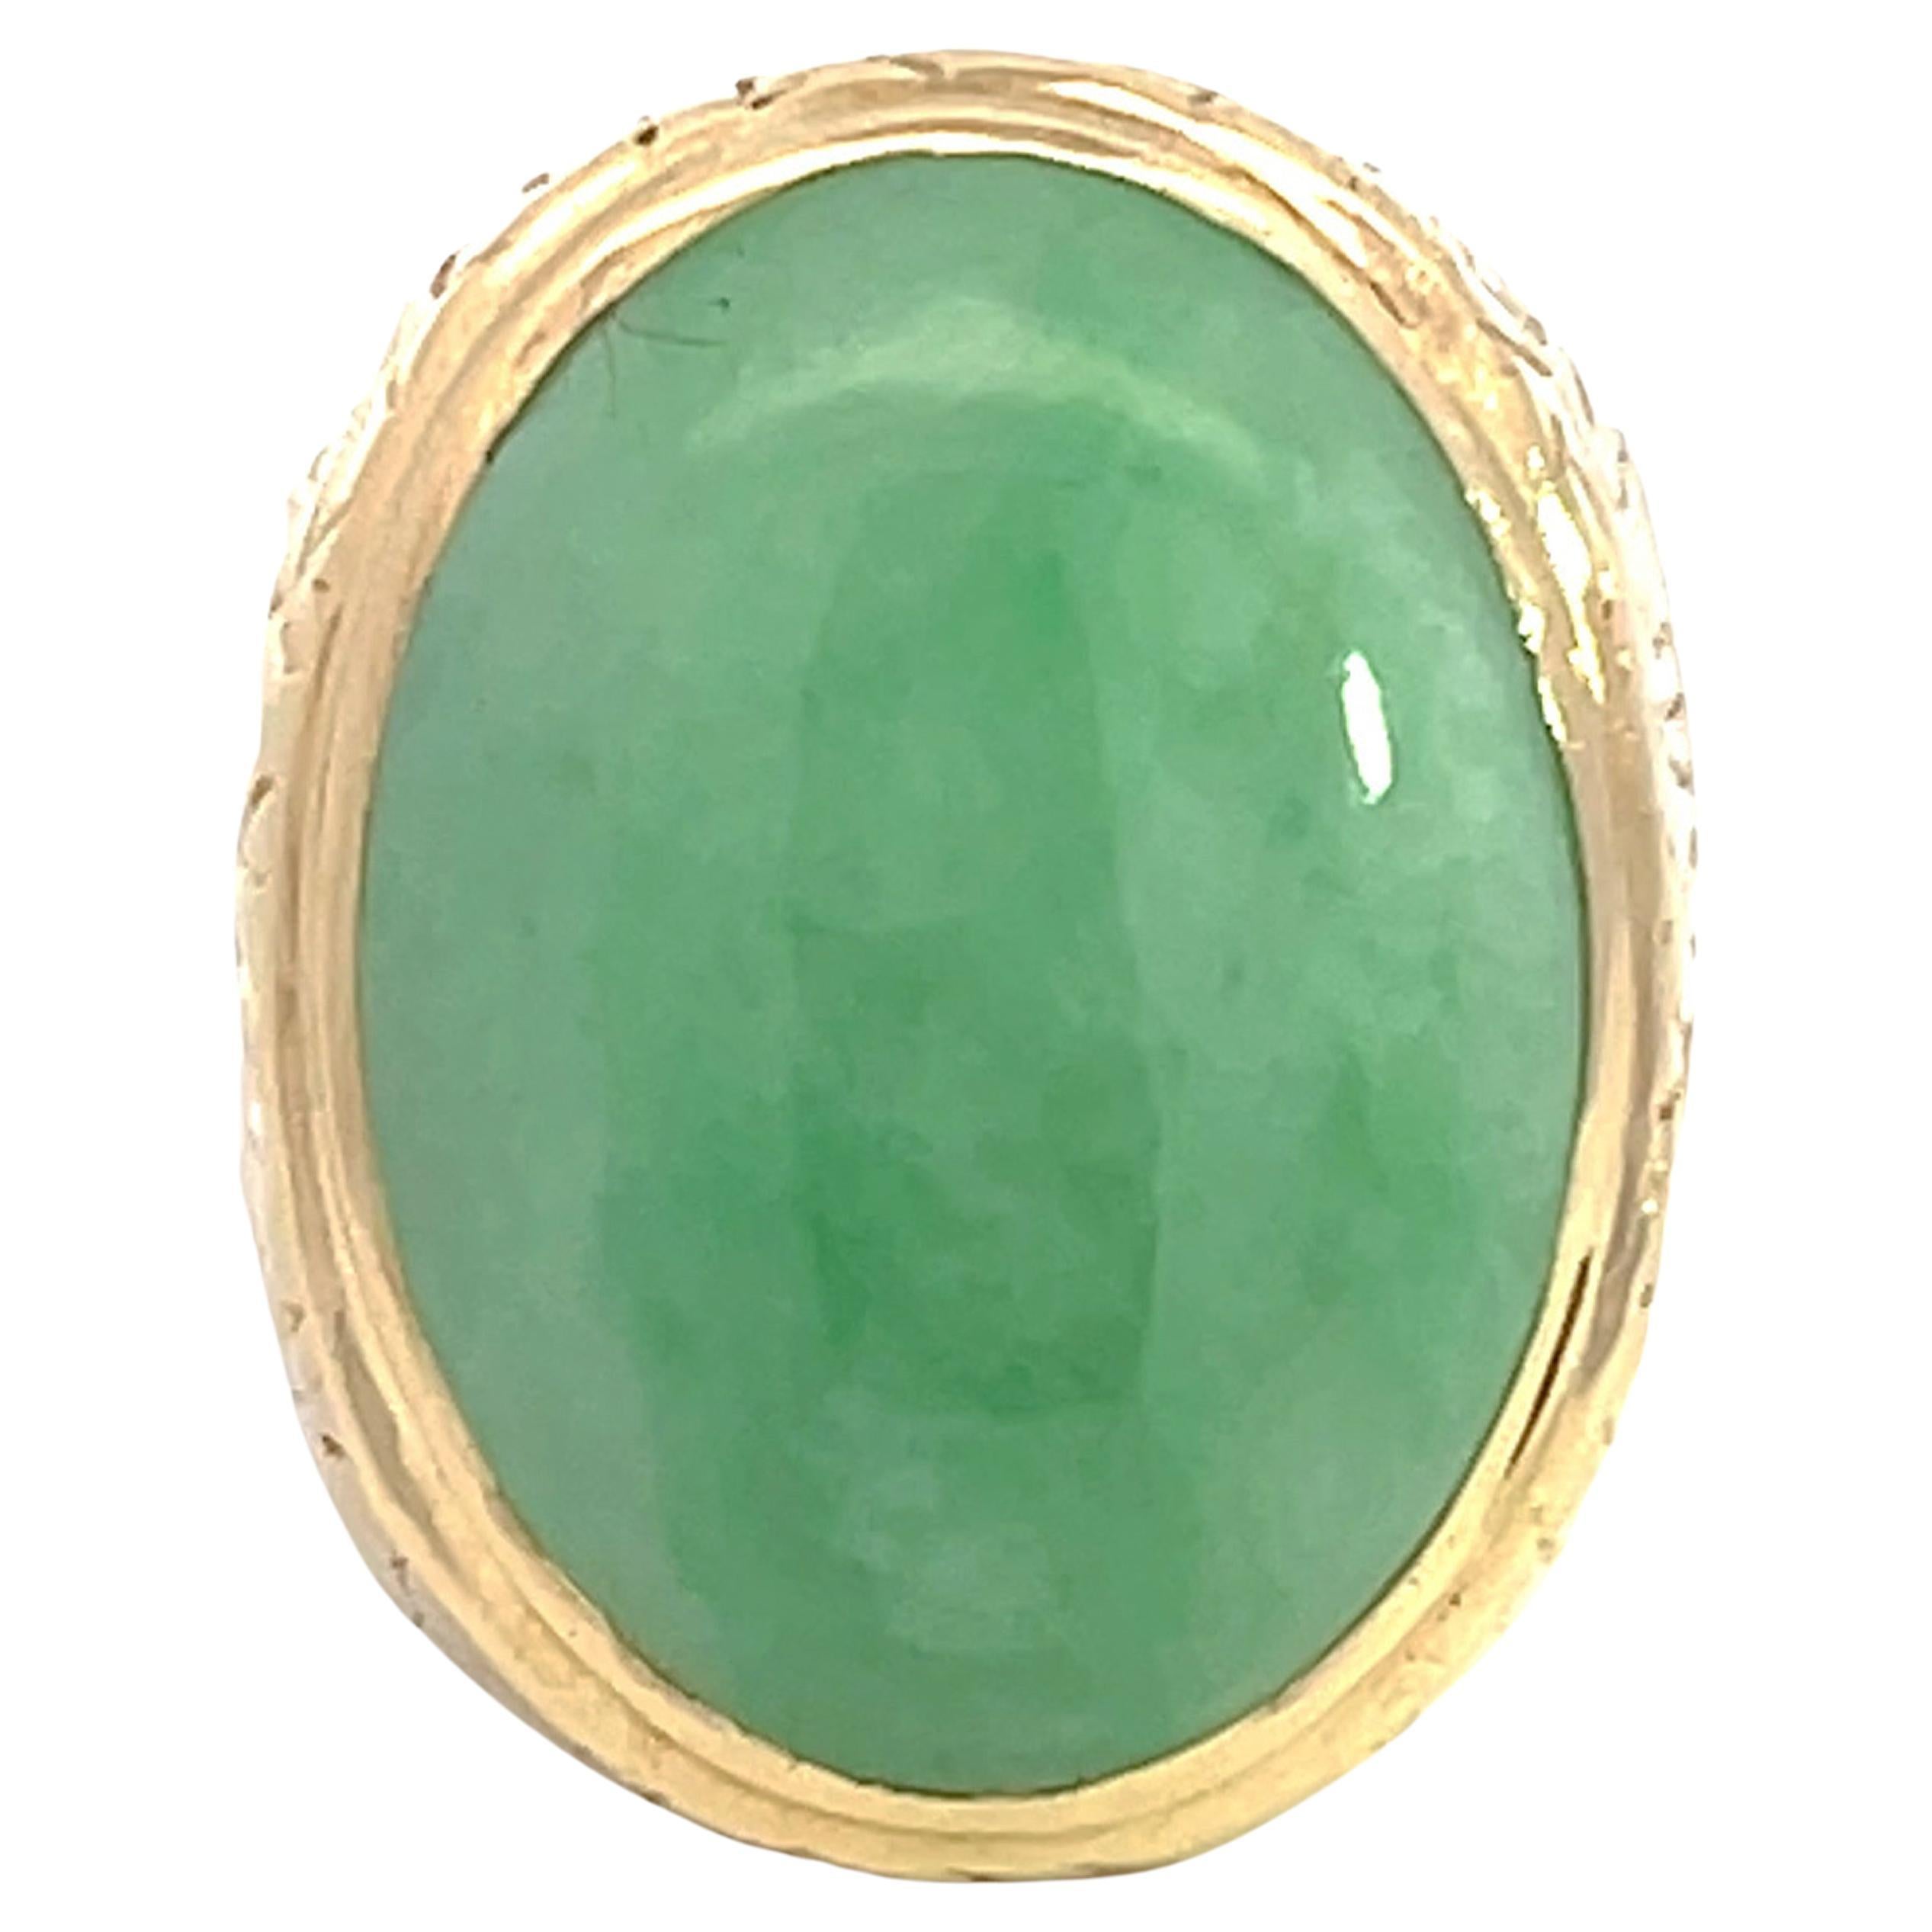 Oval Cabochon Green Jade Ring with Textured Bark Shoulders in 14k Yellow Gold